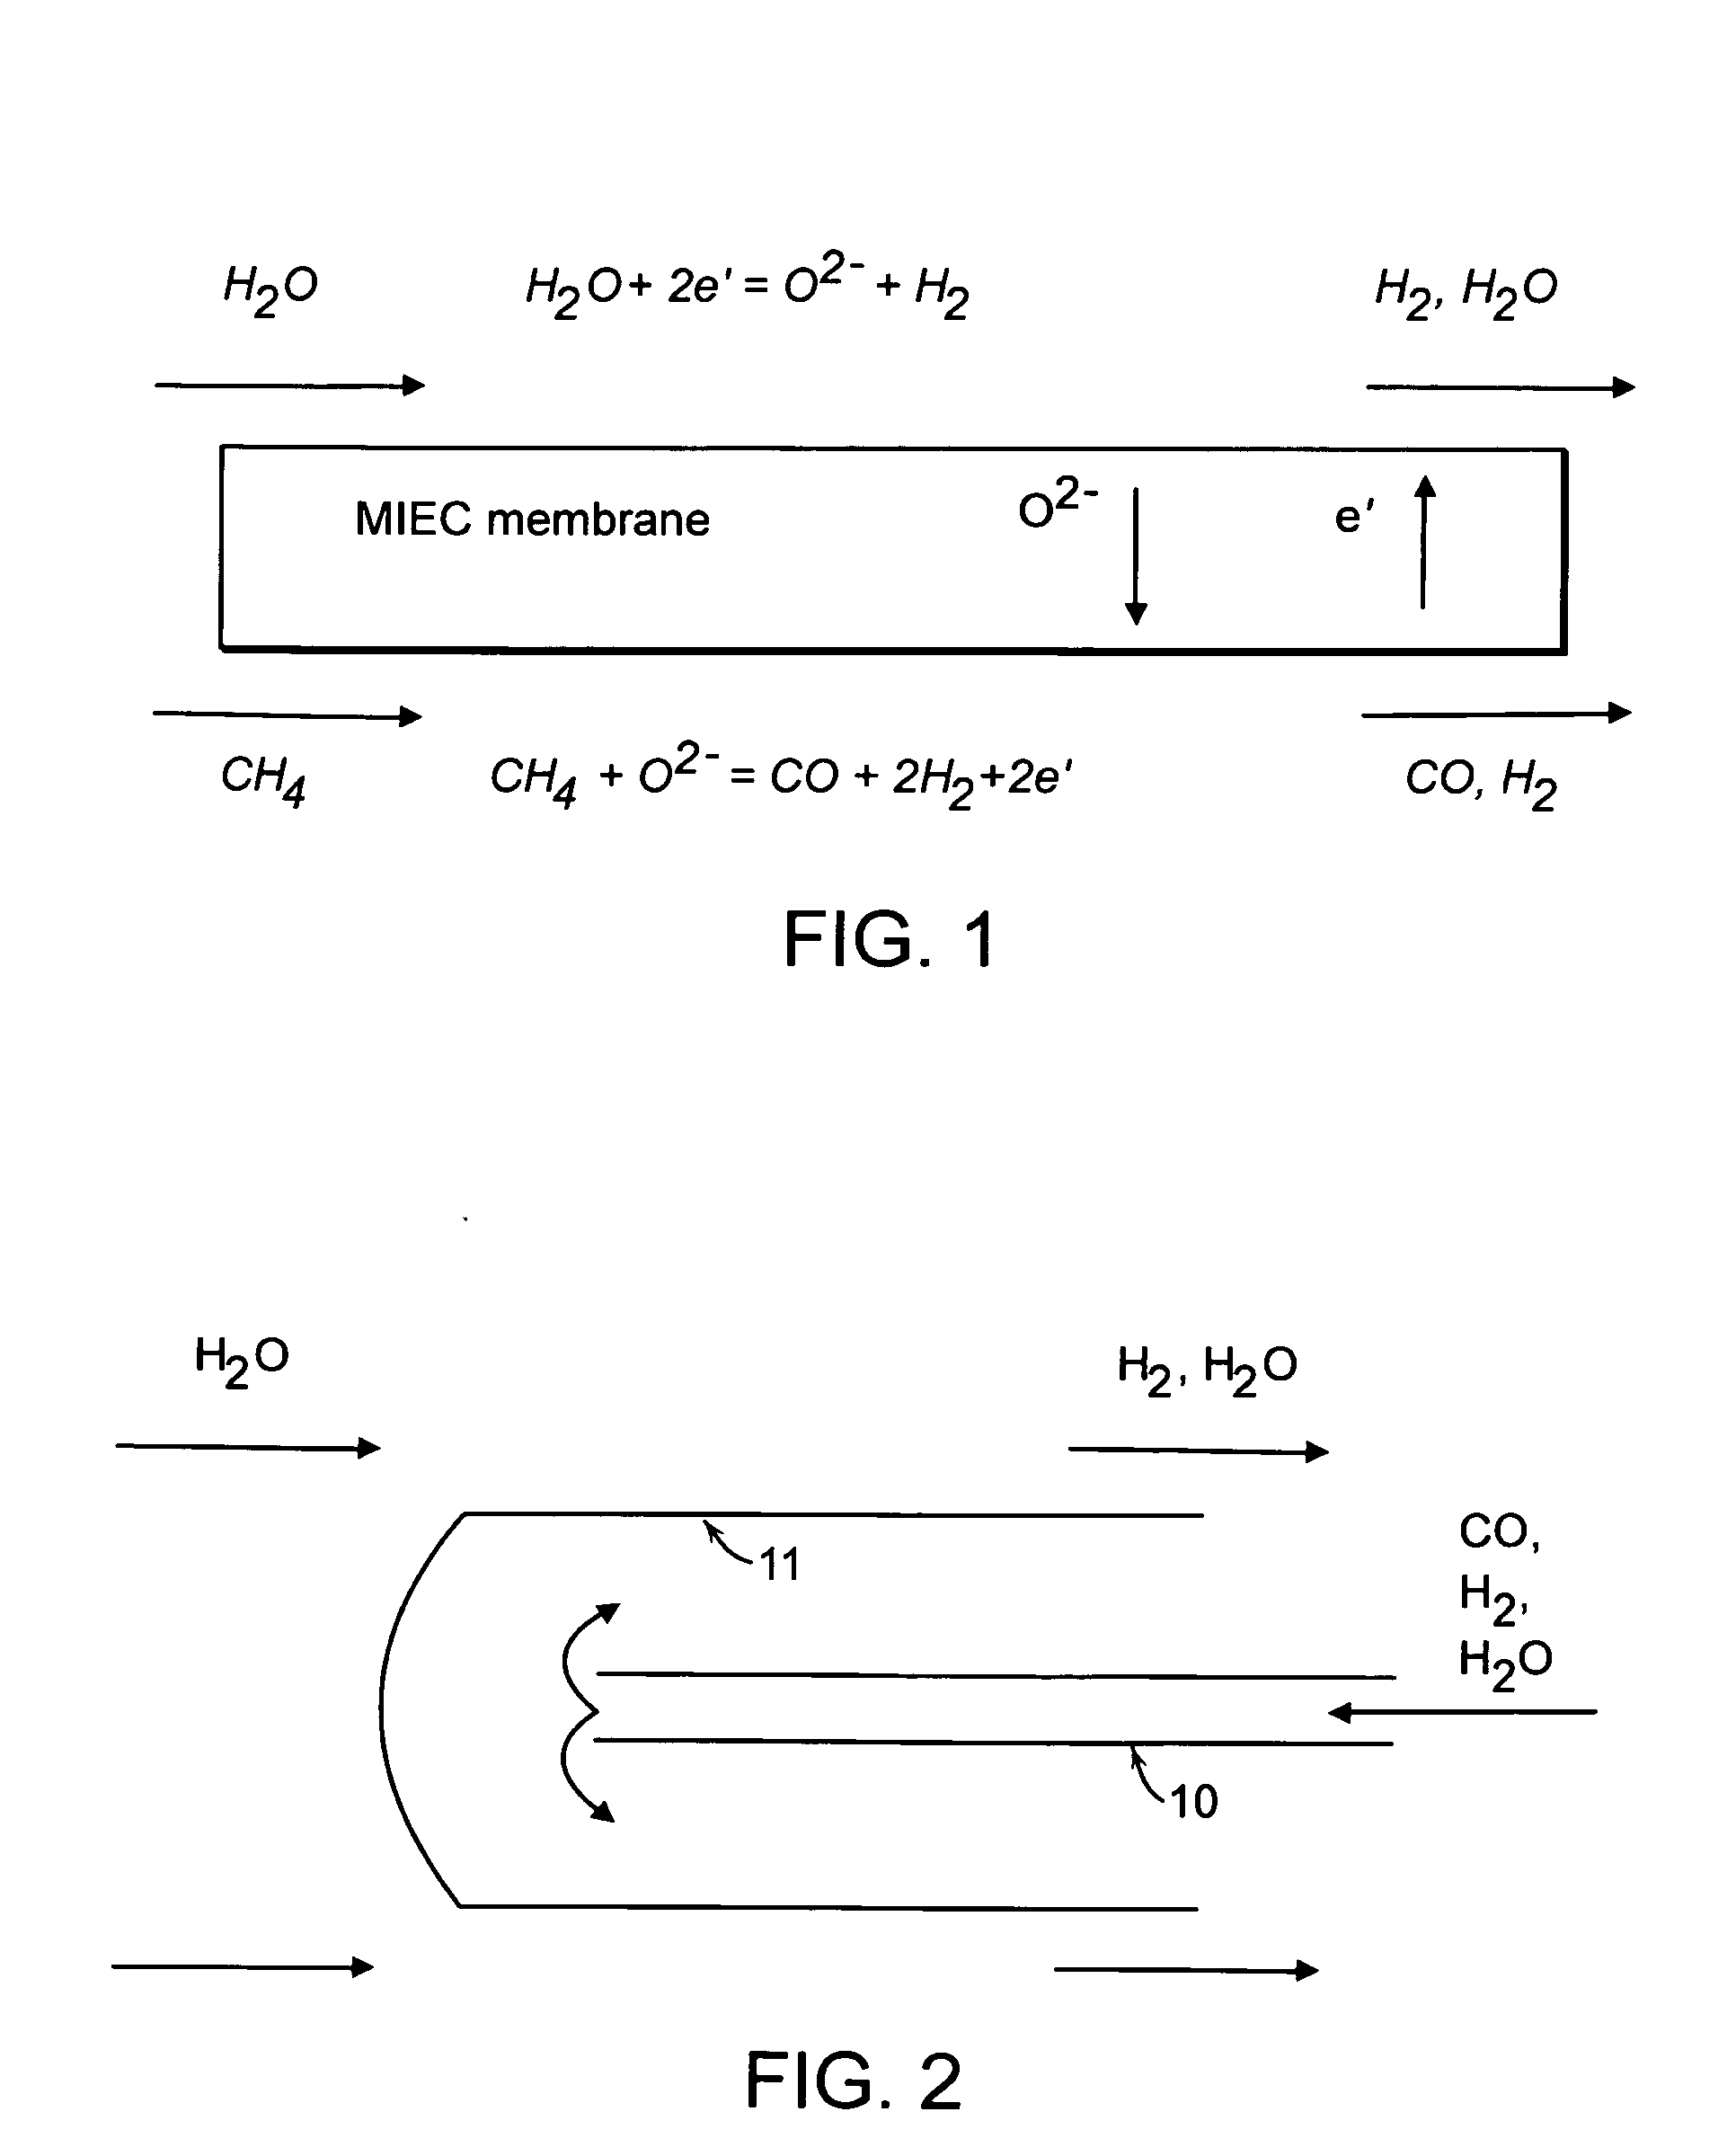 Composite mixed oxide ionic and electronic conductors for hydrogen separation